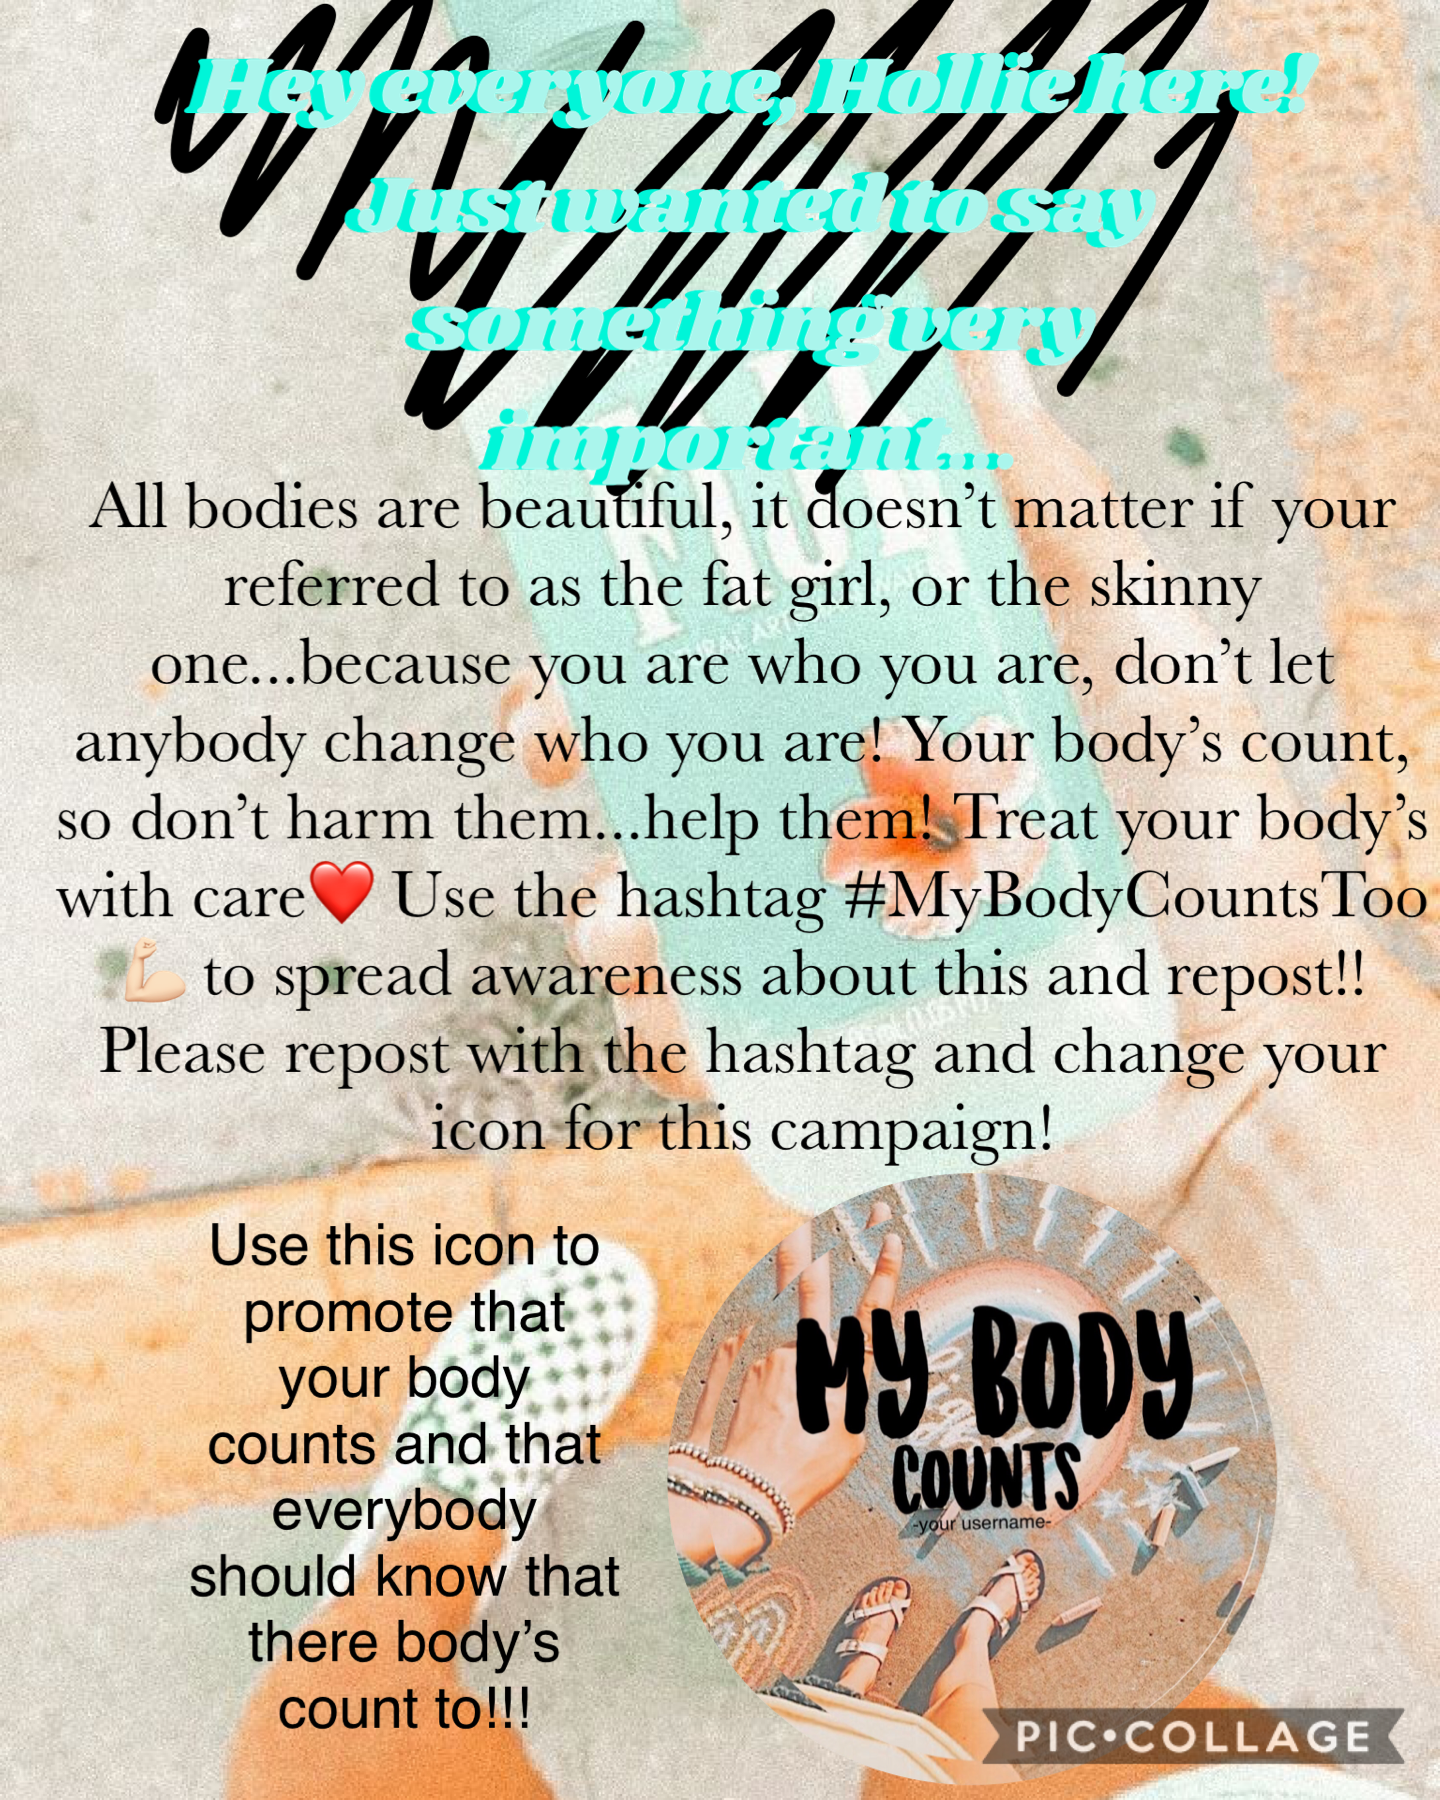 🤍🫖Tap🫖🤍
Hey, It’s Hollie here! I came here to give you all a look into the real world...Please don’t body shame, it’s not right, don’t do it to yourself, or to others! Just be you! Repost and use the hashtag #MyBodyCountsToo💪🏻!-Hollie-🫖🤍